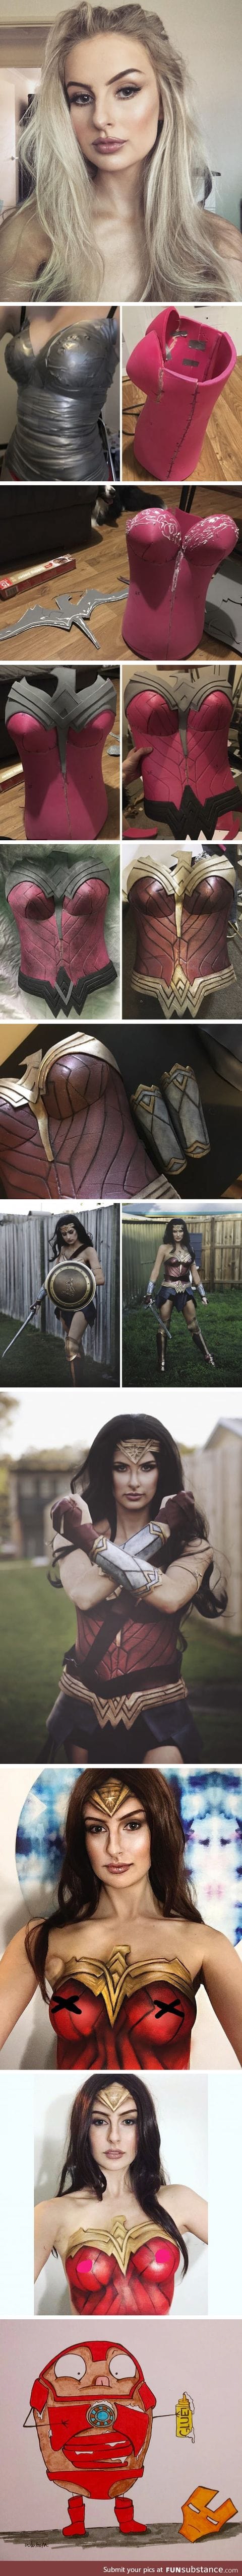 Makeup Artist Spent 50 hours Making Wonder Woman Outfit From A Yoga Mat